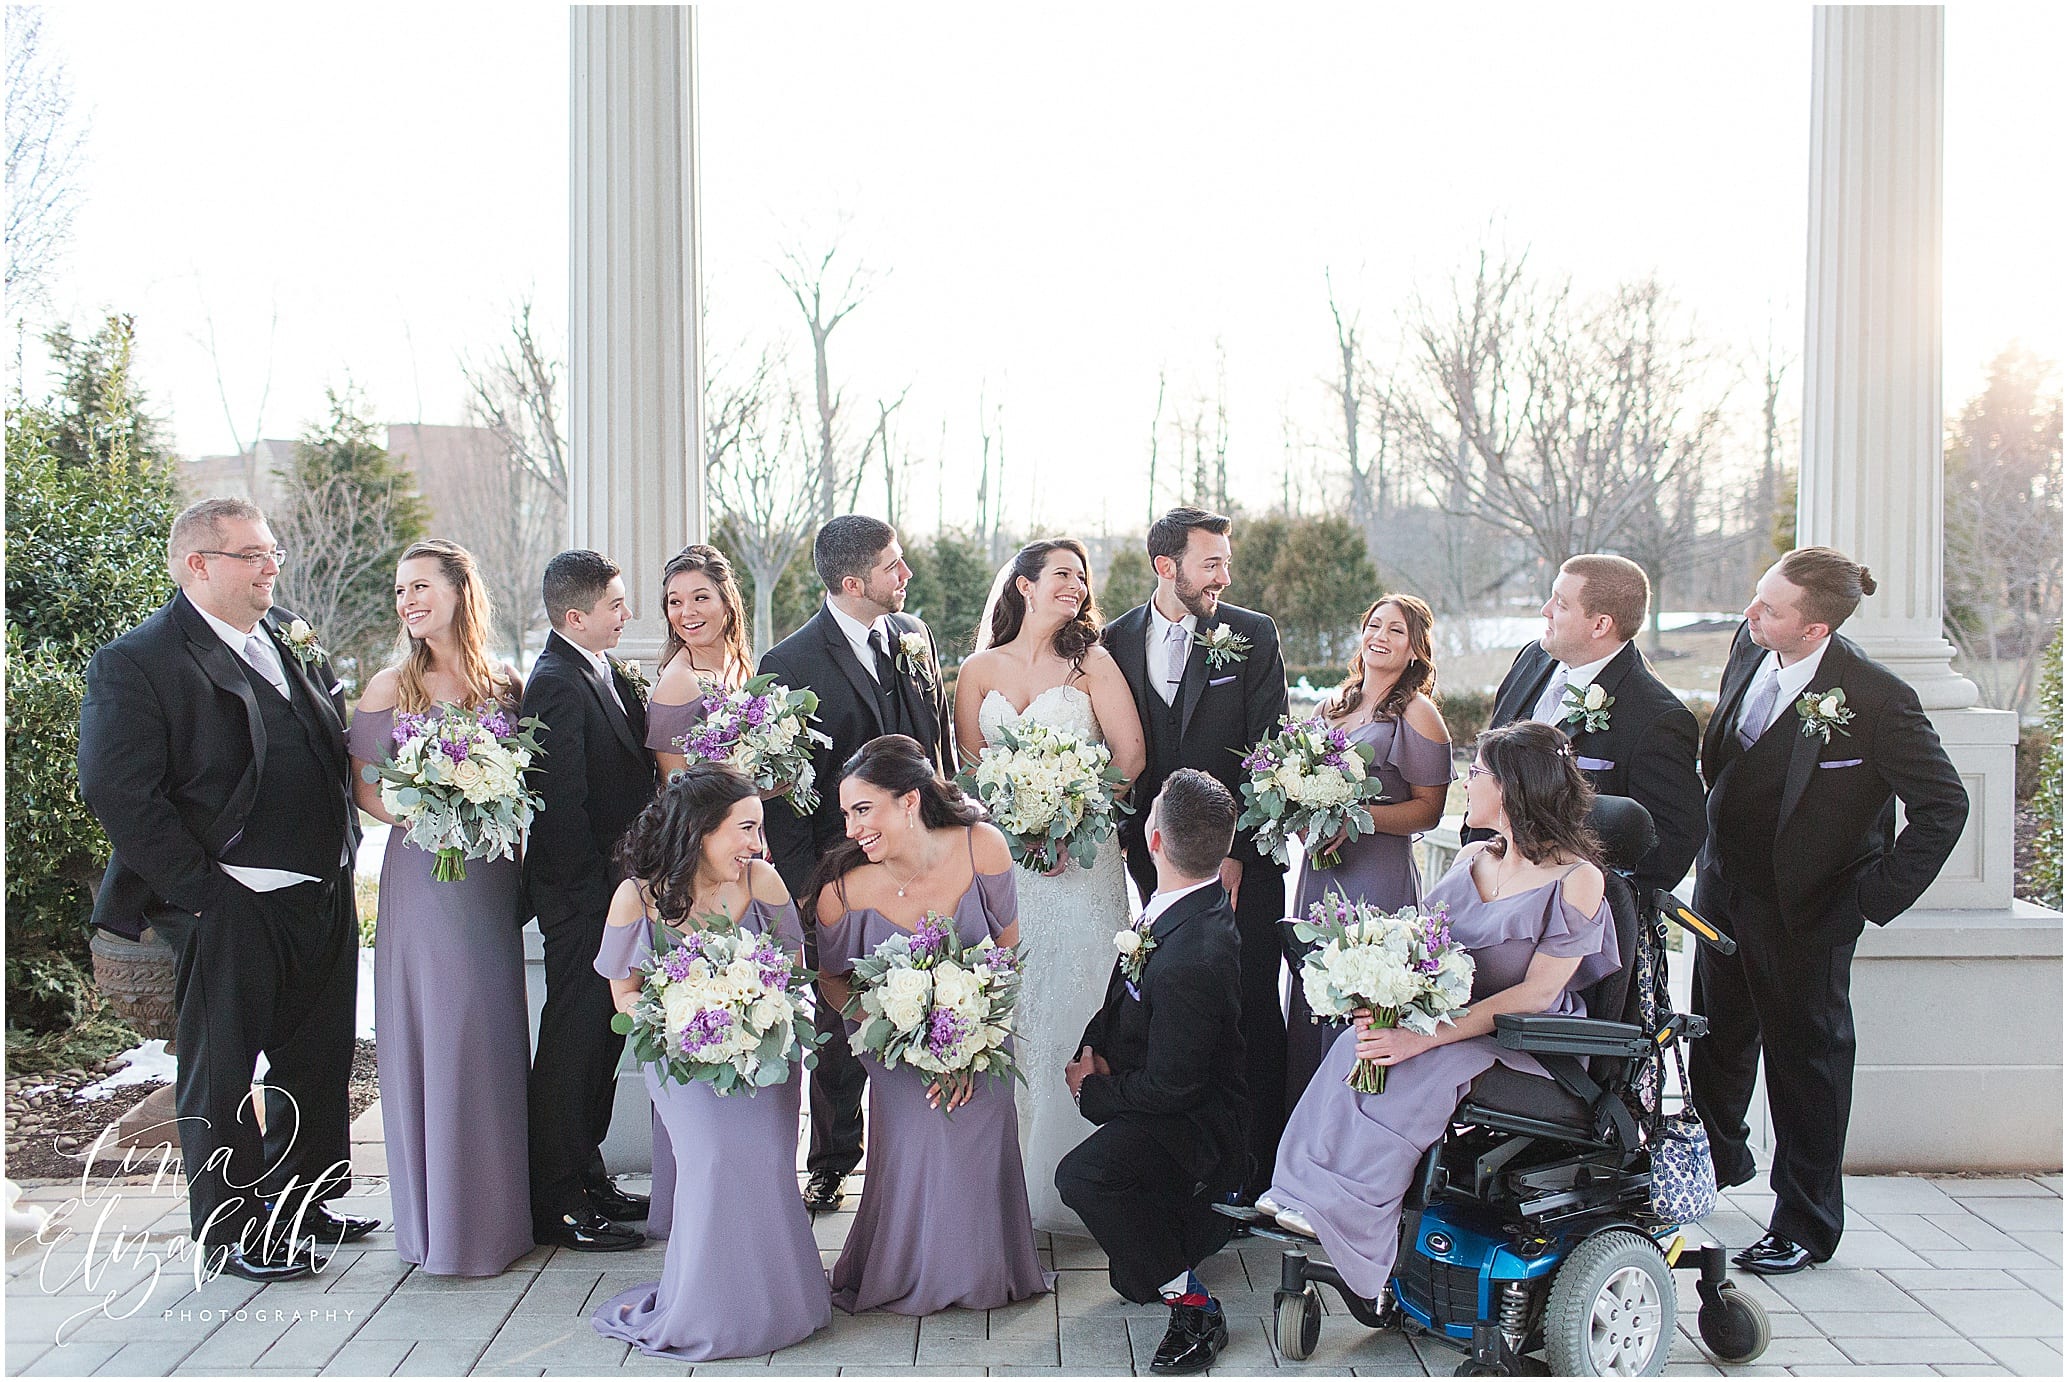 The Palace at Somerset Park winter wedding - Large bridal party by Tina Elizabeth Photography